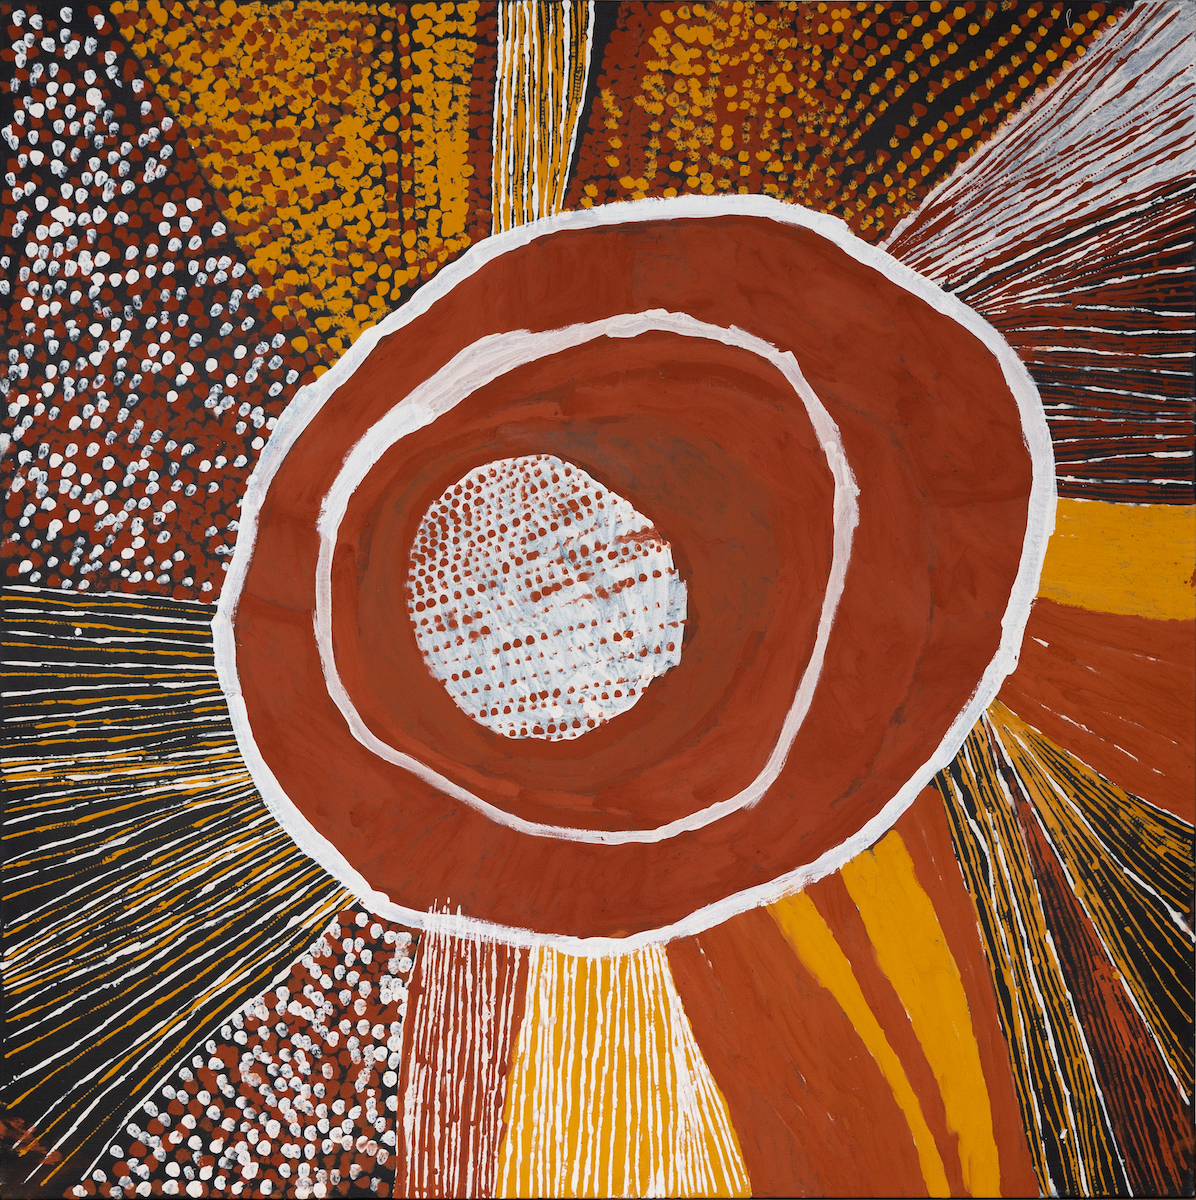 A celestial abstract painting of circles, dots and lines in red, ochre, black and white.